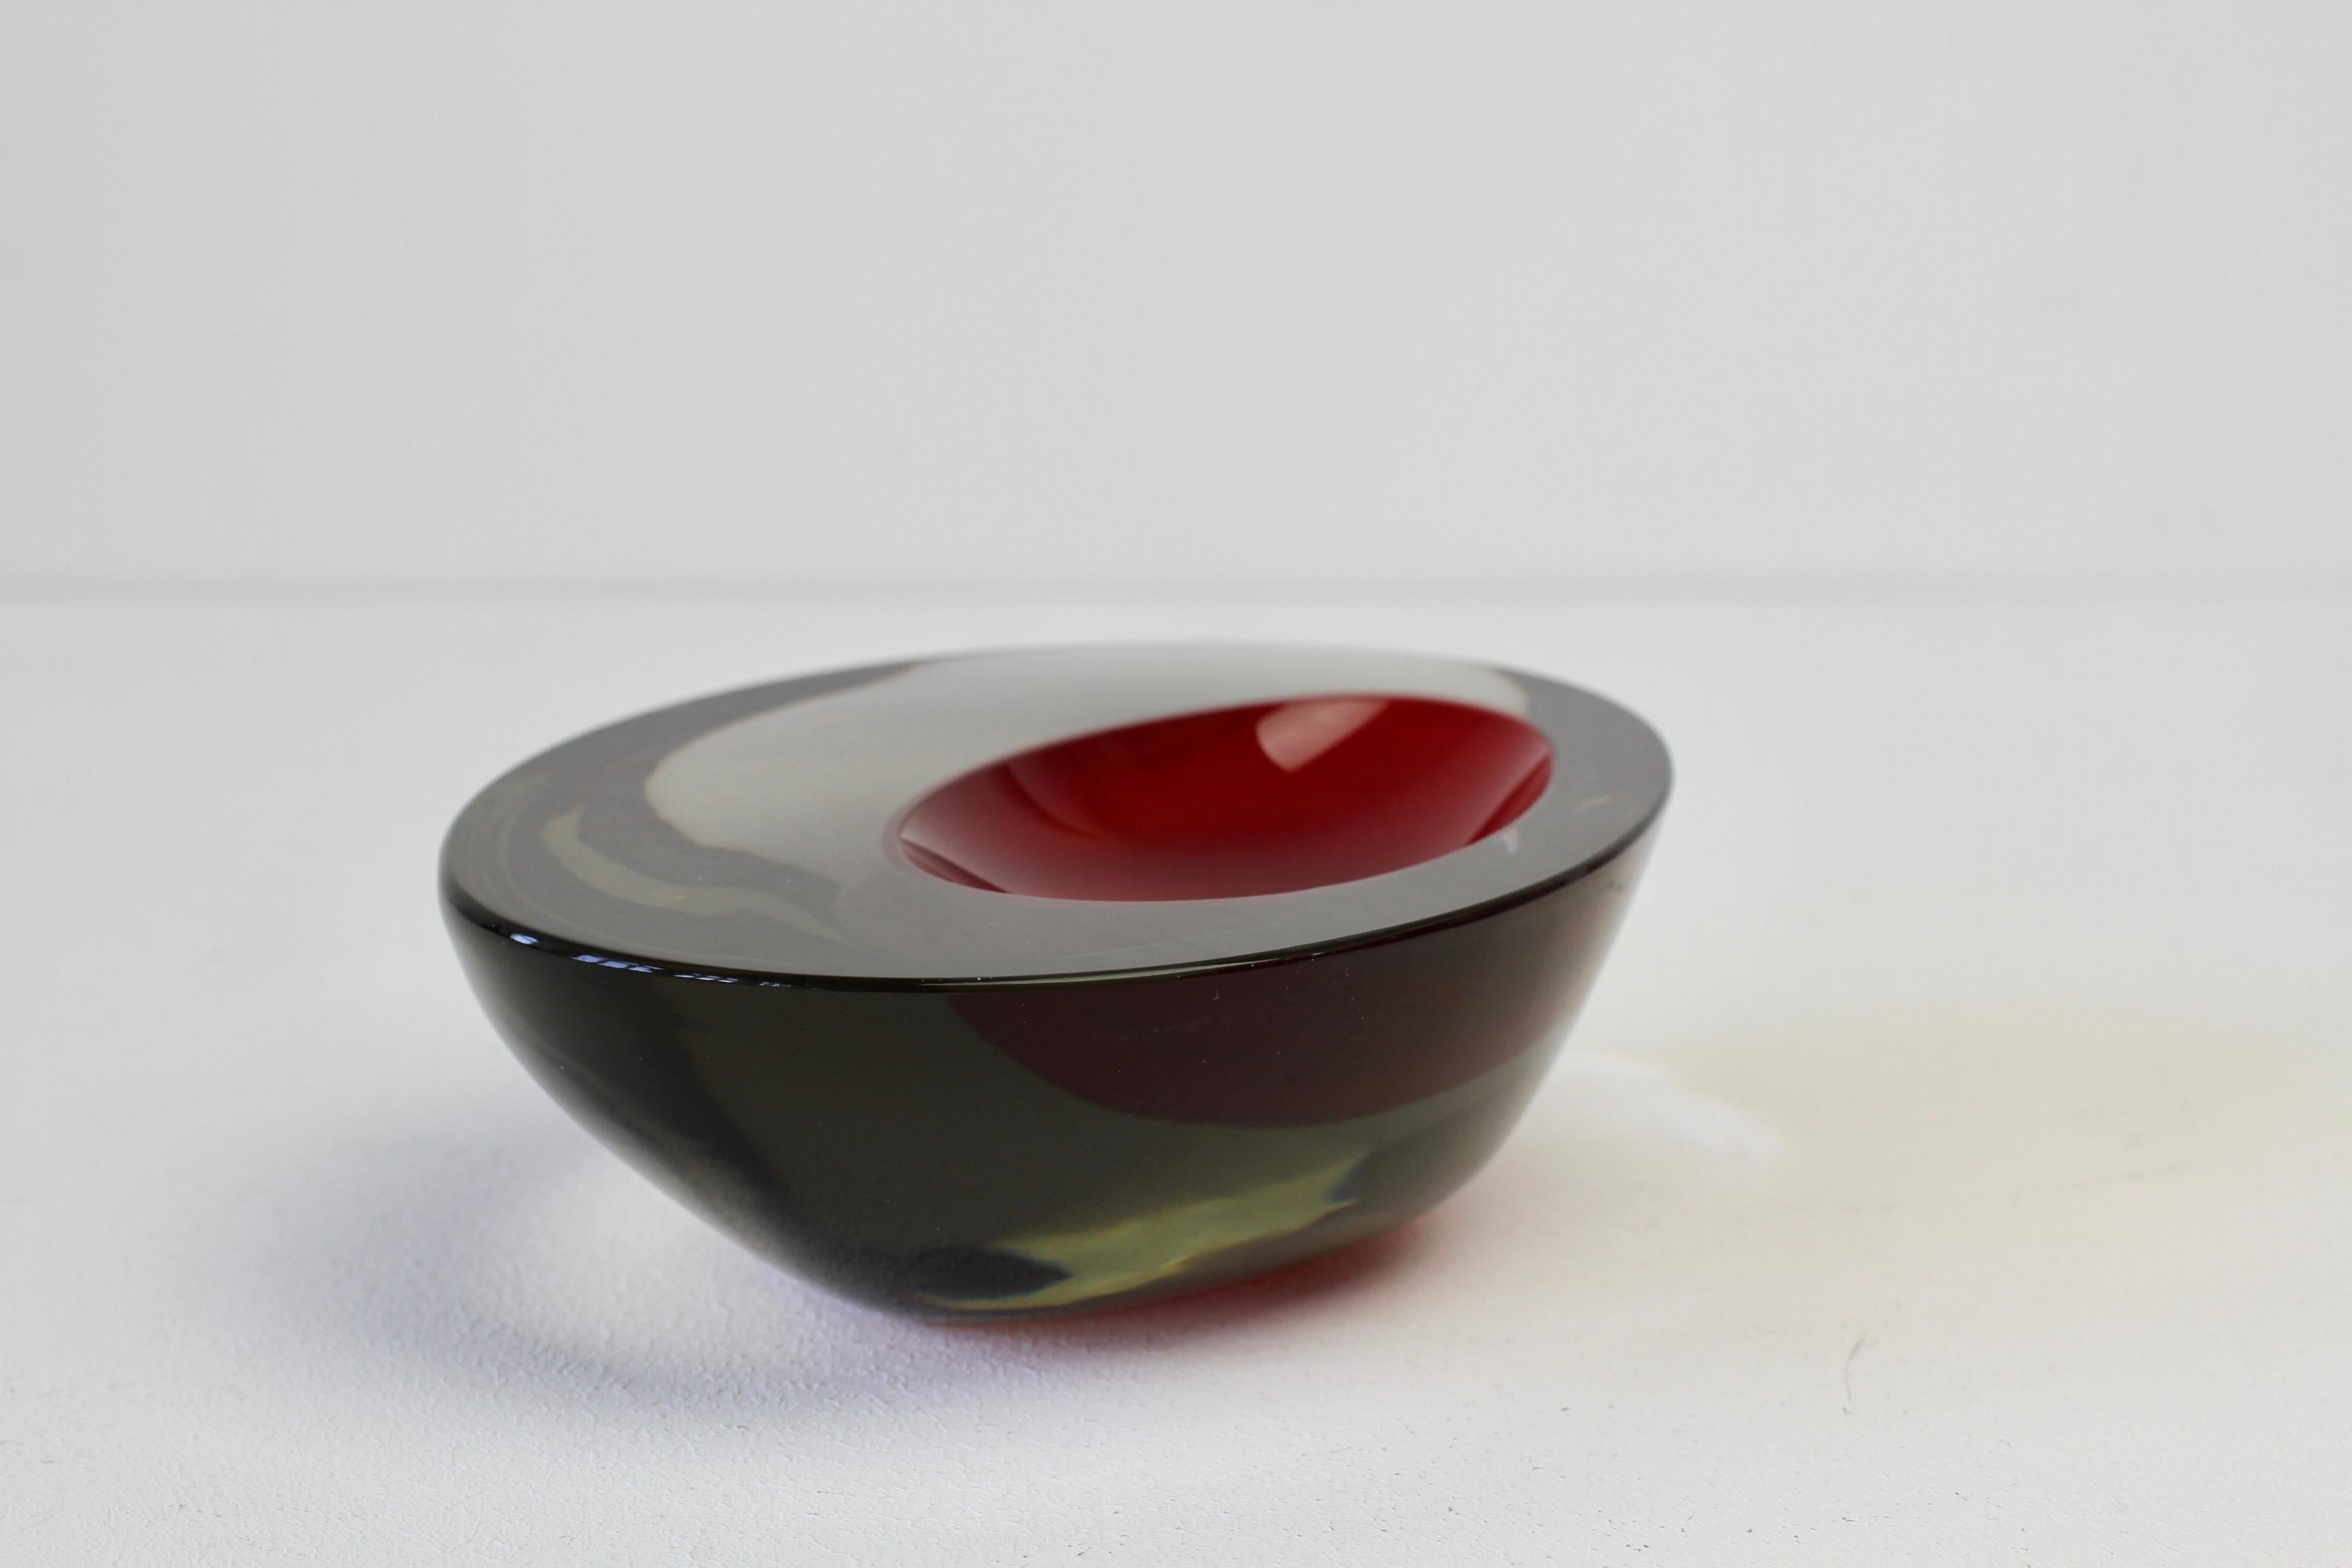 Large Cenedese Italian Asymmetric Red Sommerso Murano Glass Bowl Dish or Ashtray For Sale 7